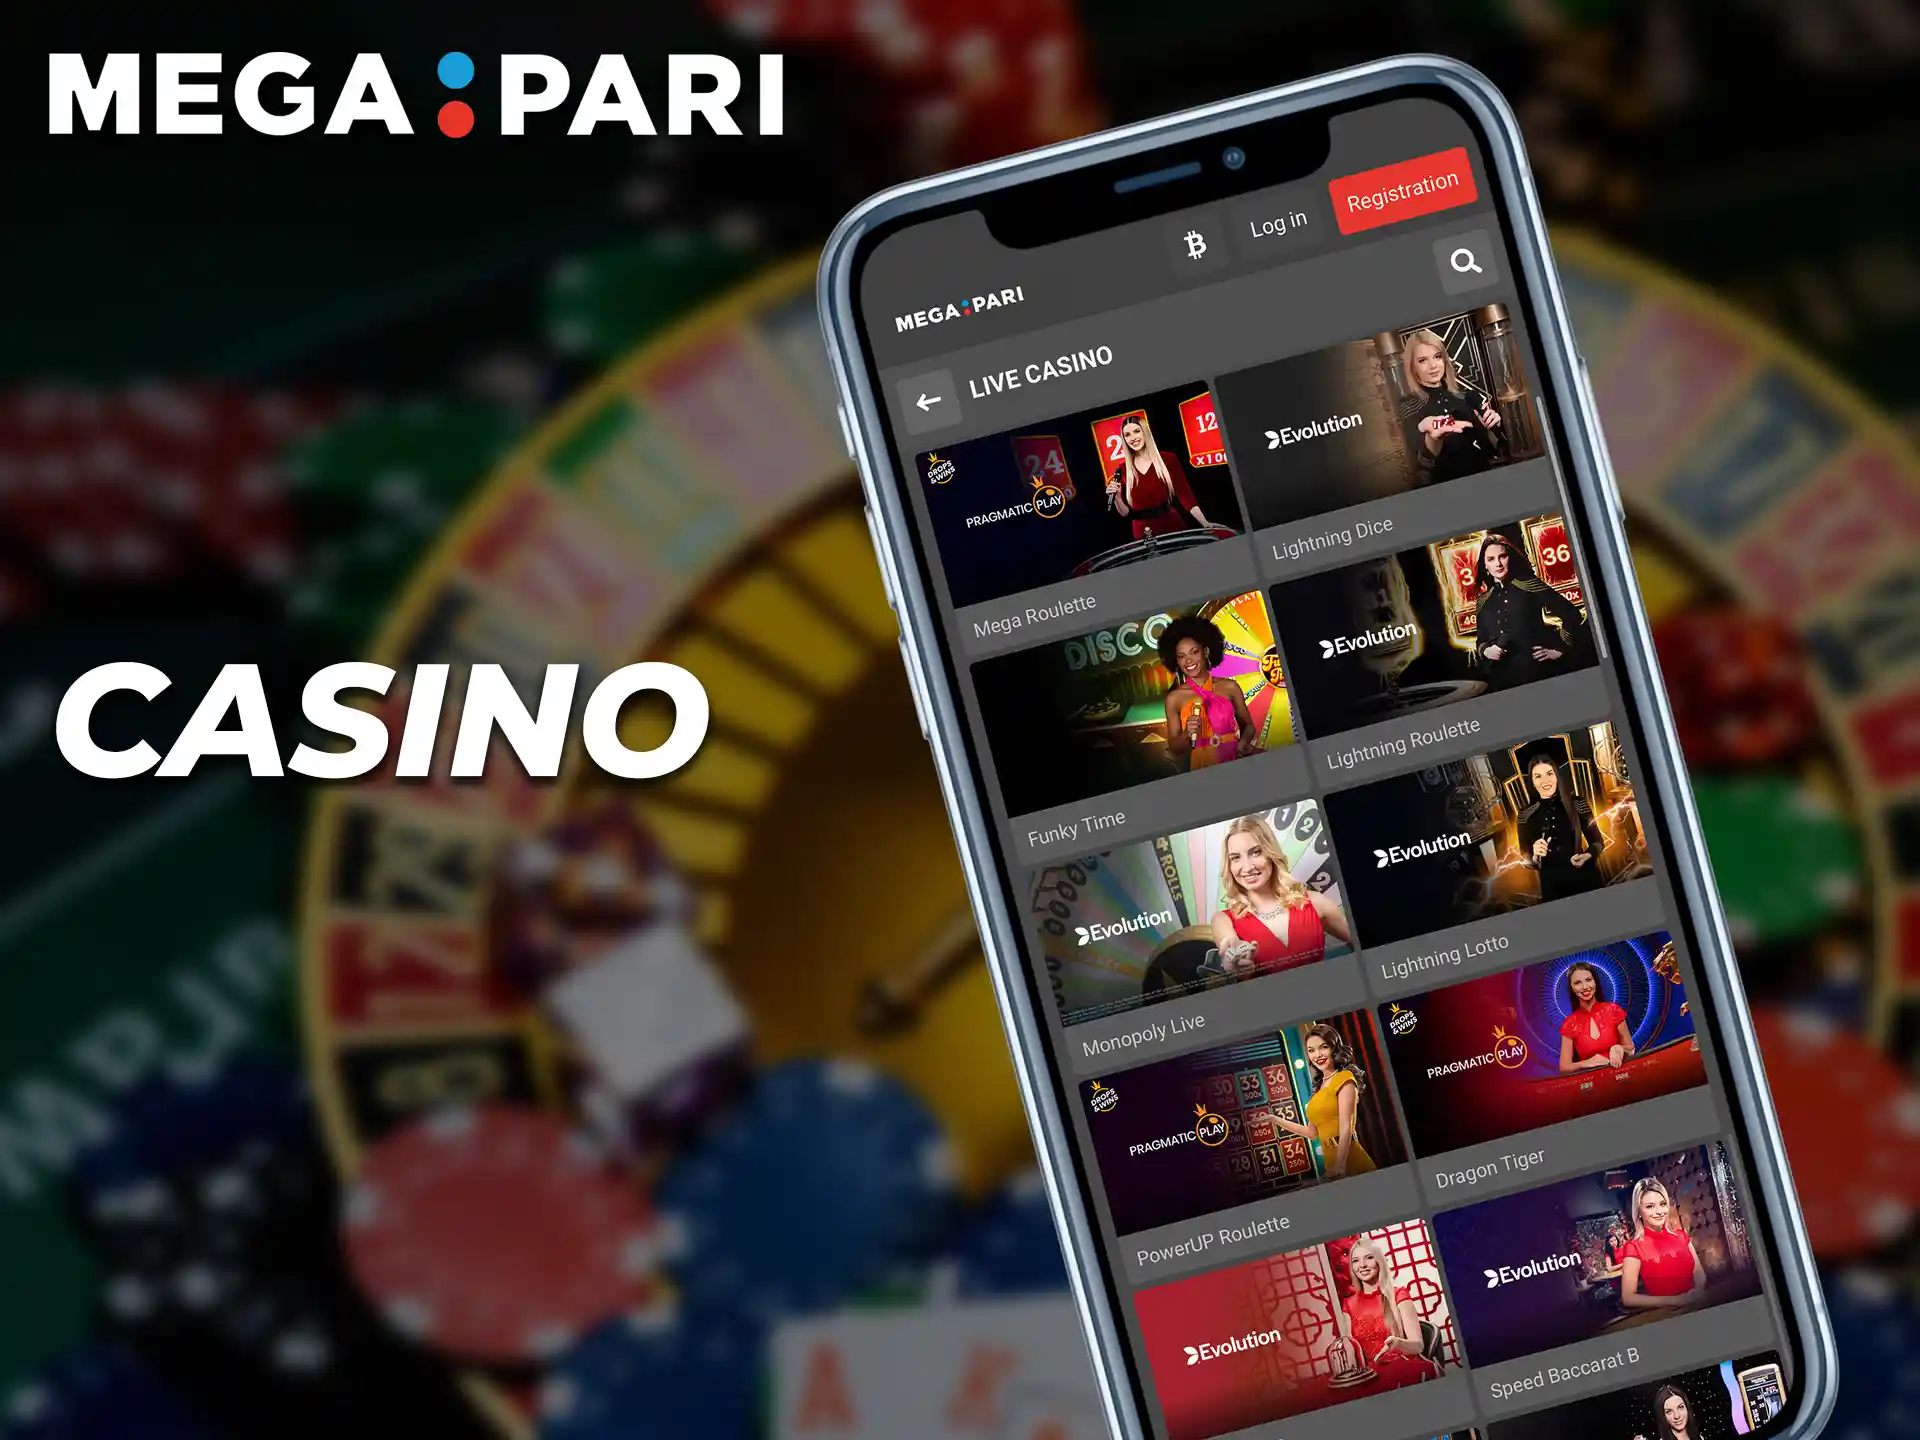 The Megapari app has a Casino with over 2000 games.